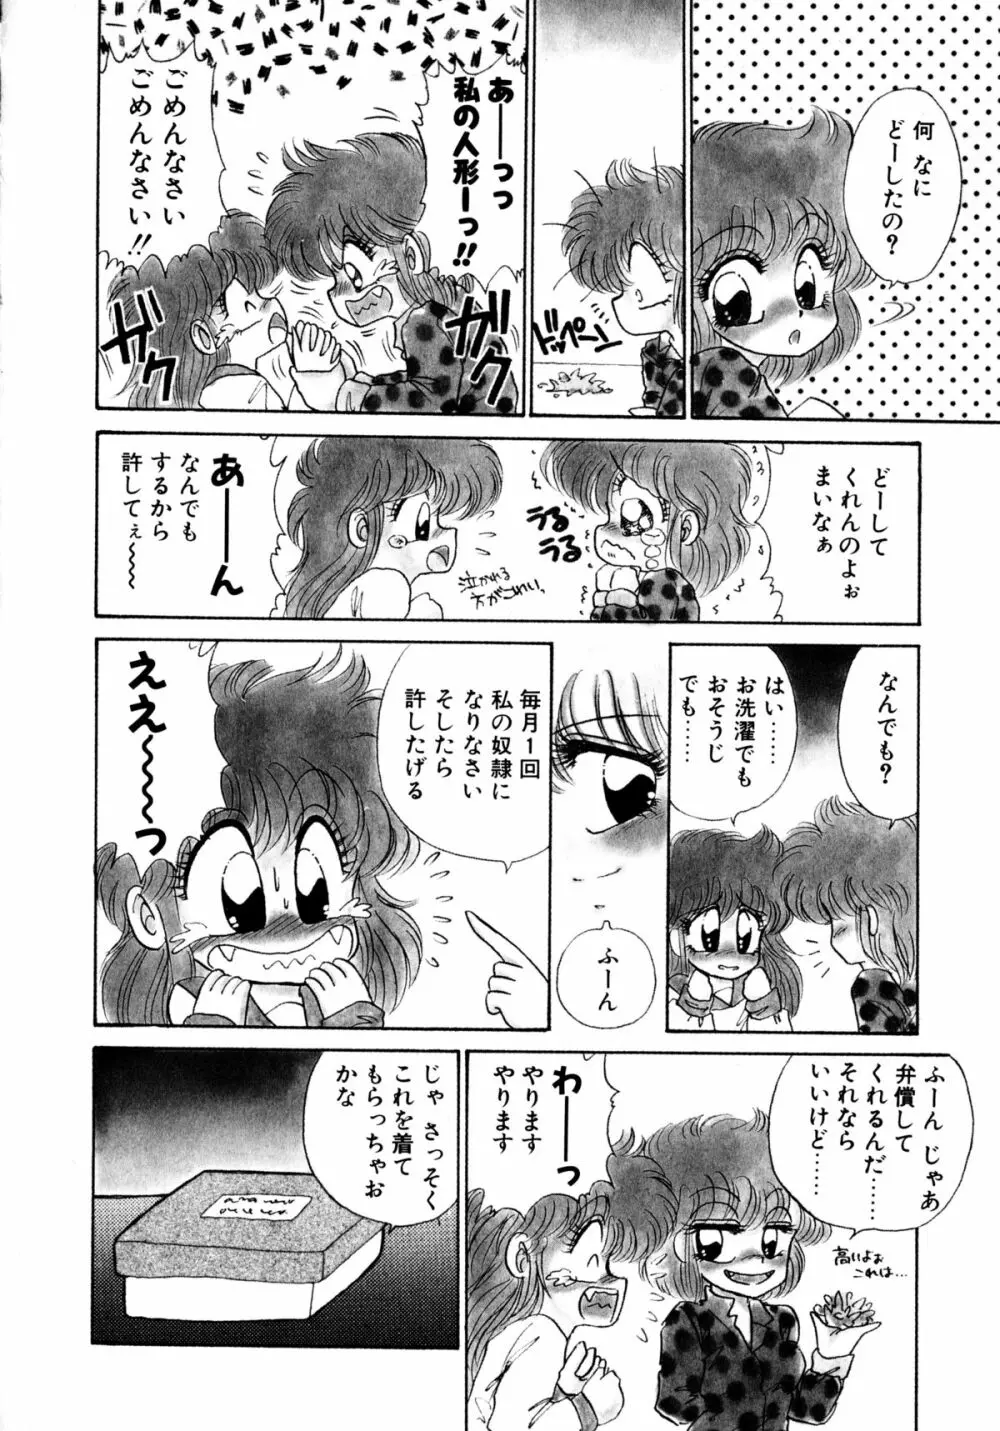 After Page.41